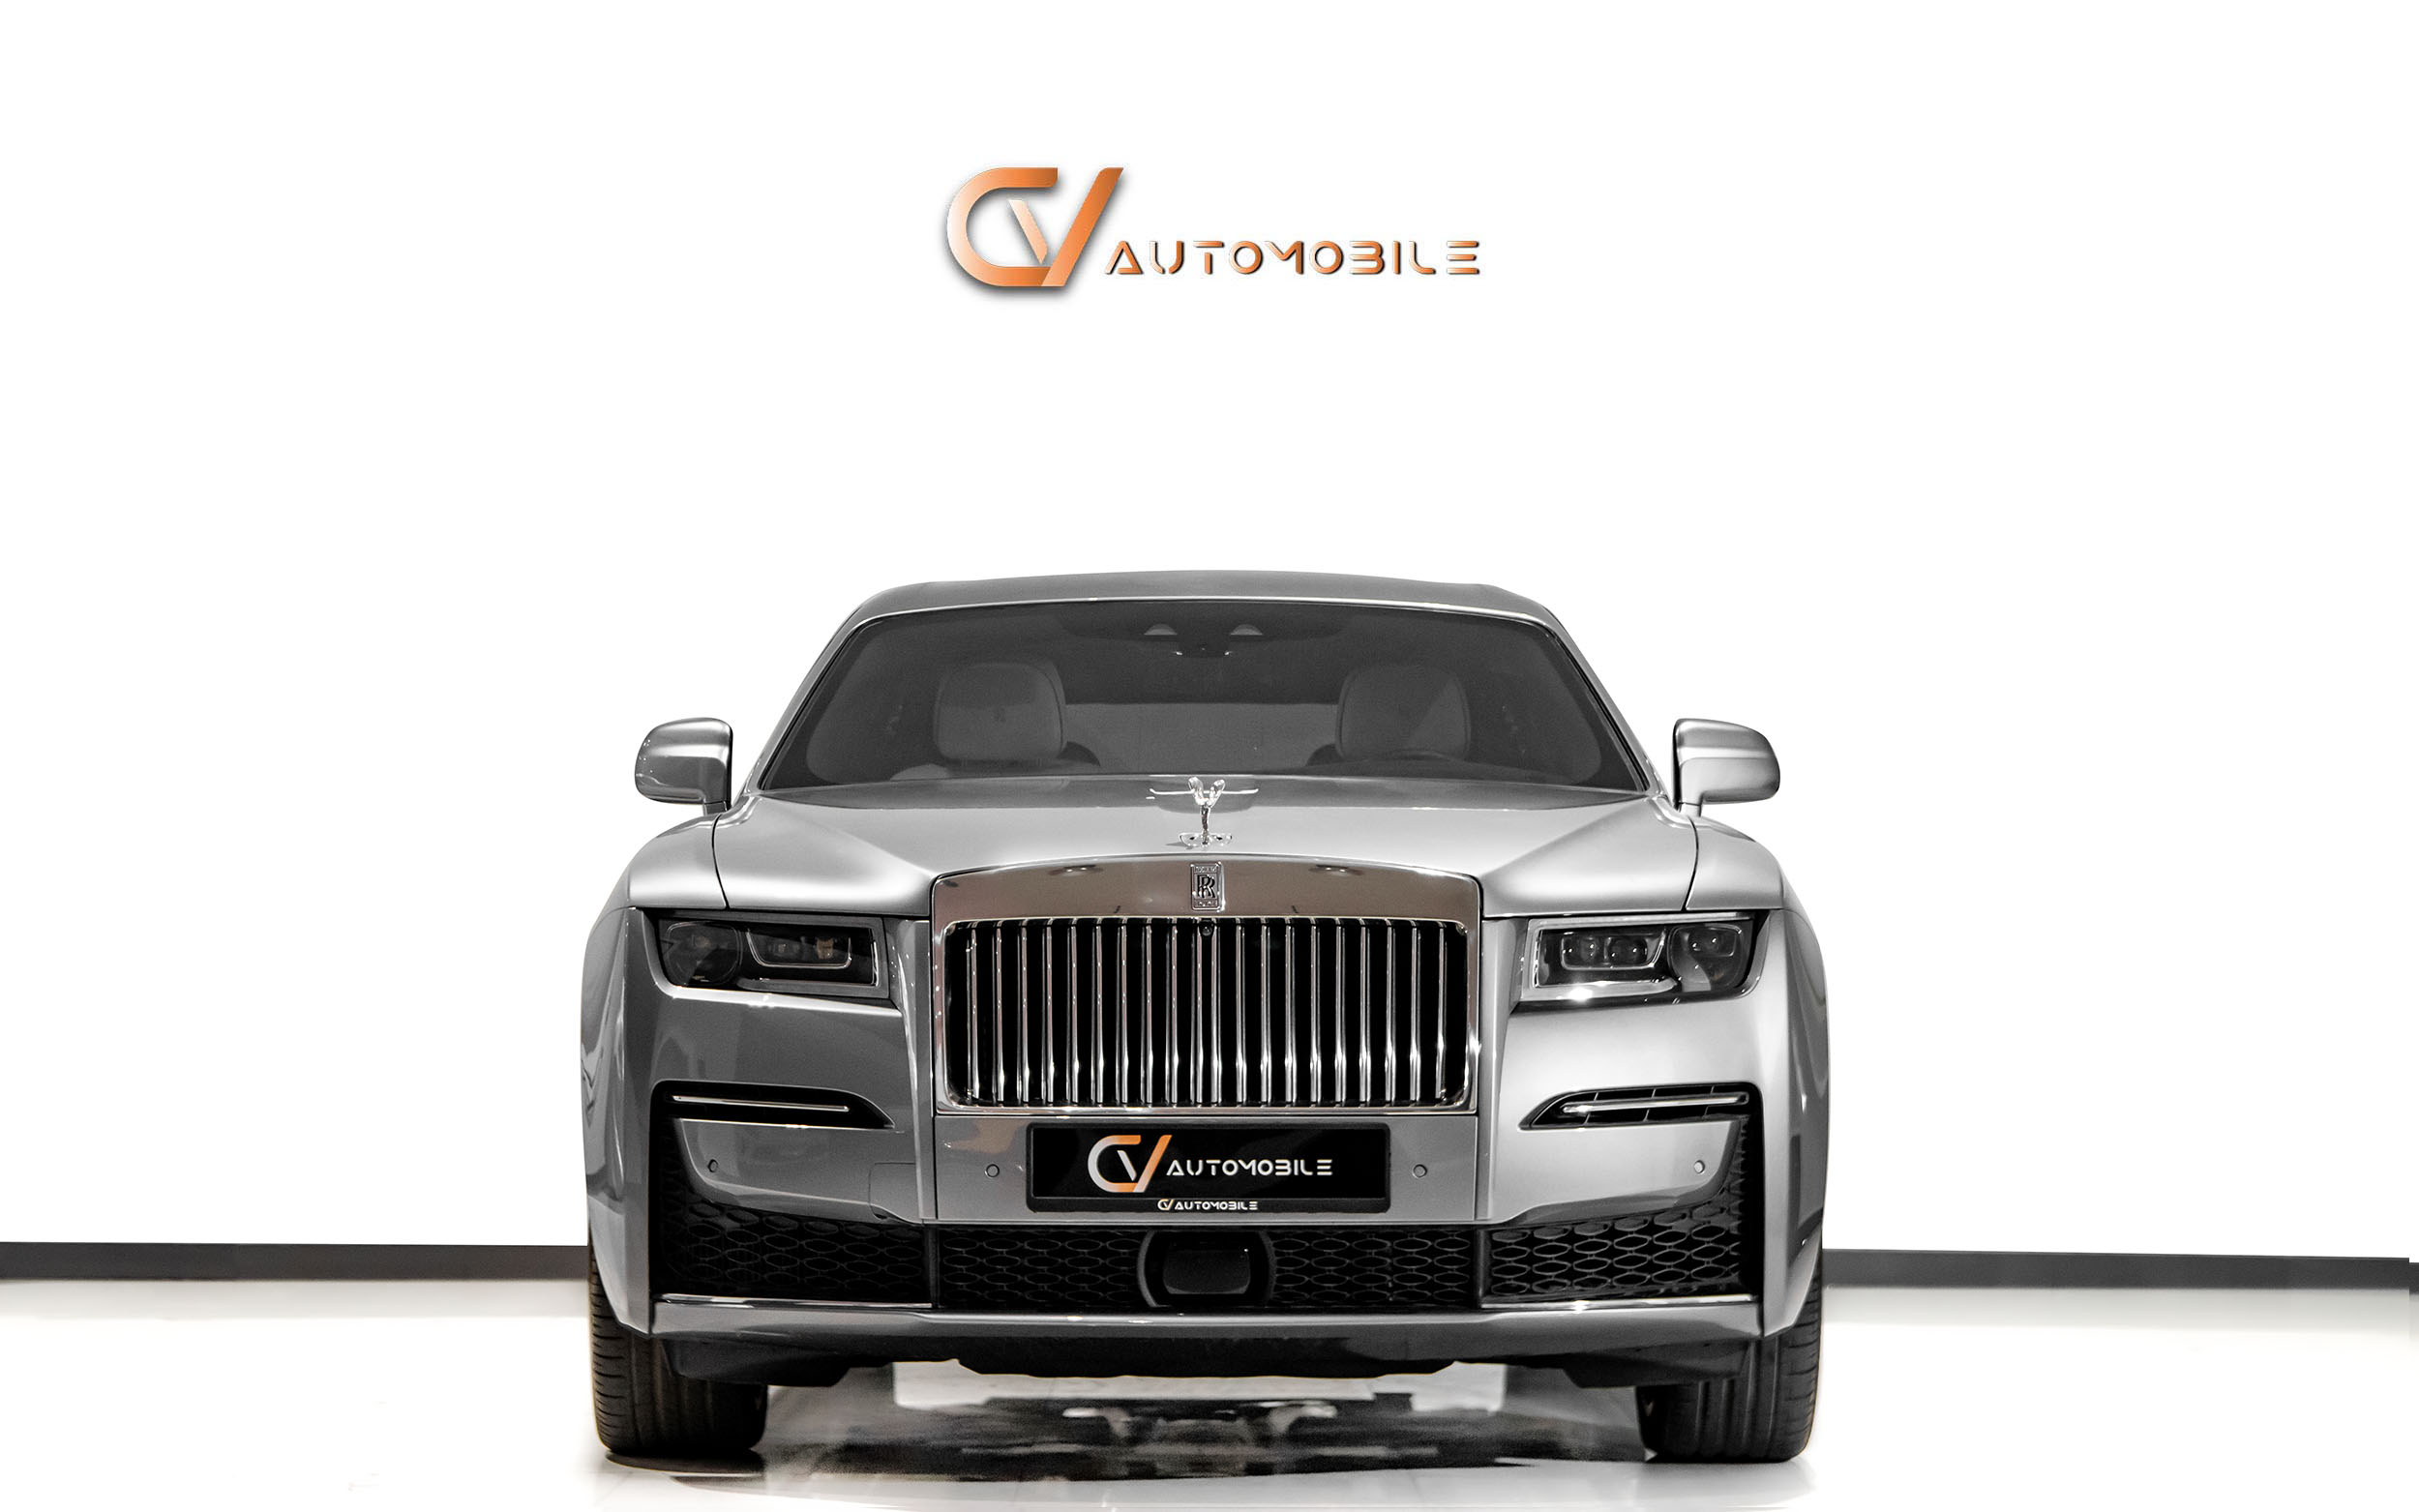 New  Used Rolls Royce Cars for Sale in UAE  Yalla Deals  Cars for Sale  Rolls  Royce